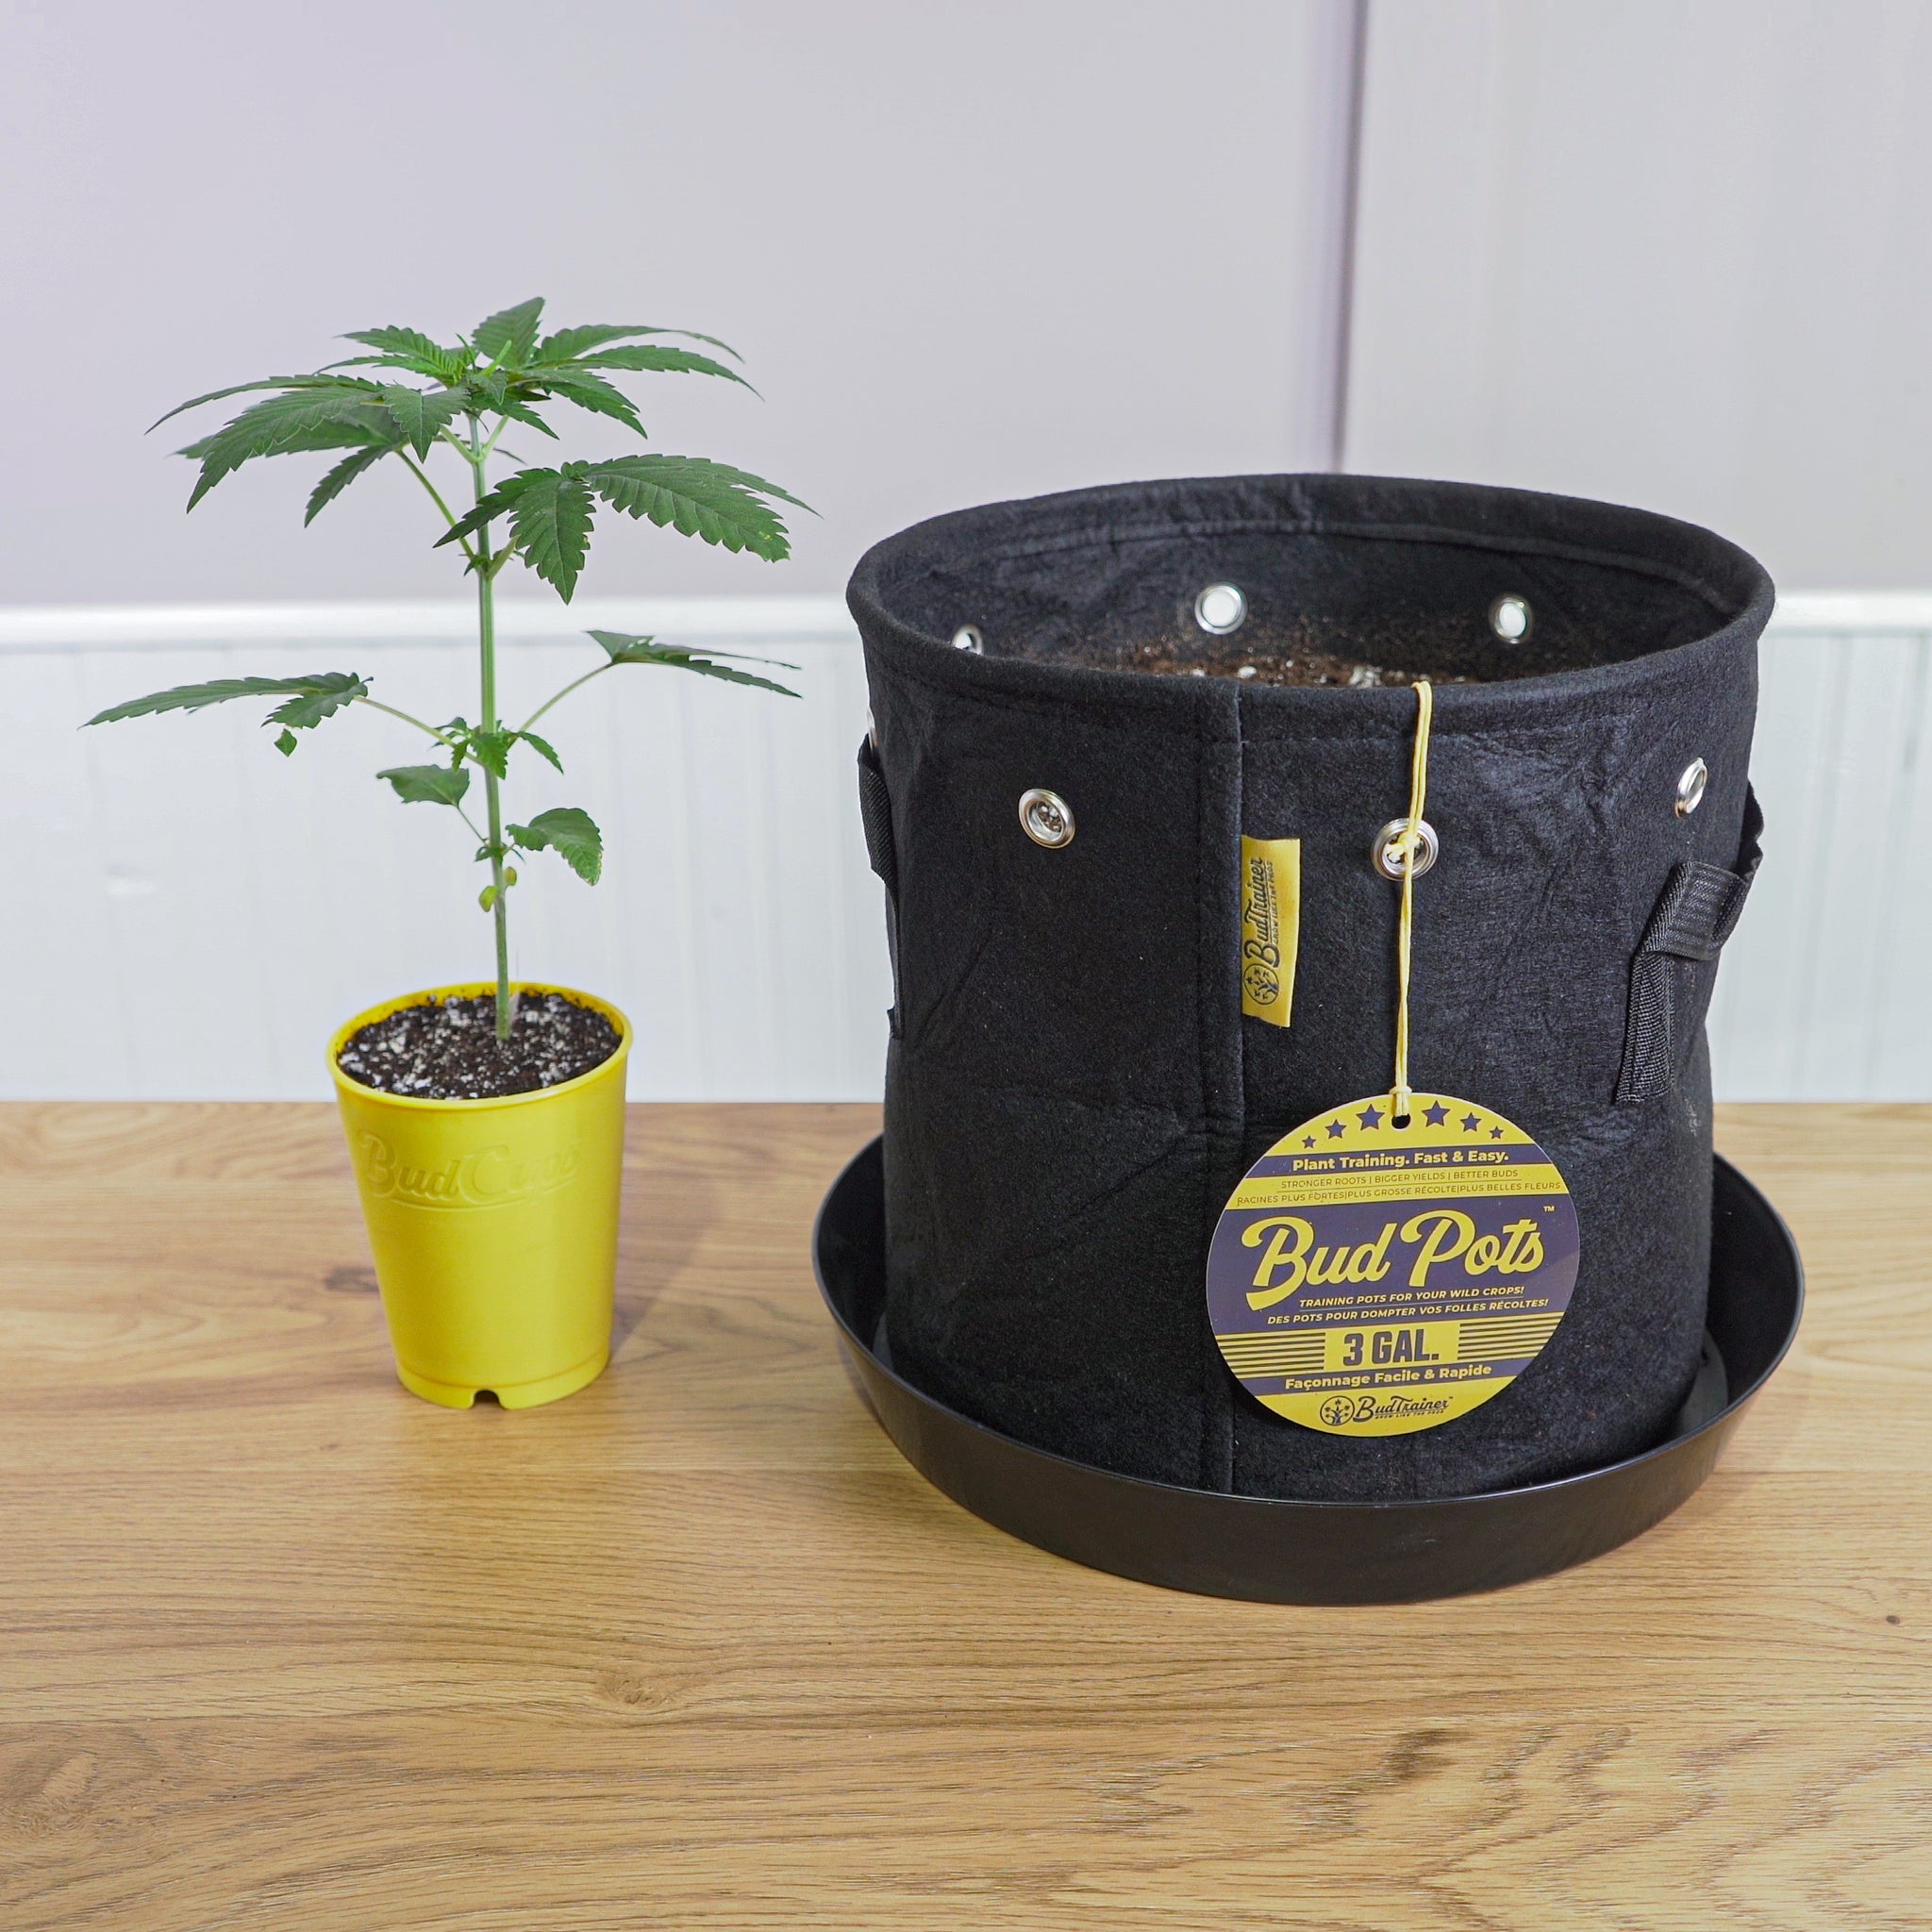 Image showing a young cannabis plant in a yellow BudCups container next to a larger black fabric BudPots container labeled '3 GAL' on a wooden table. The BudPots container has a tag hanging on it with product details and another smaller cannabis plant inside.